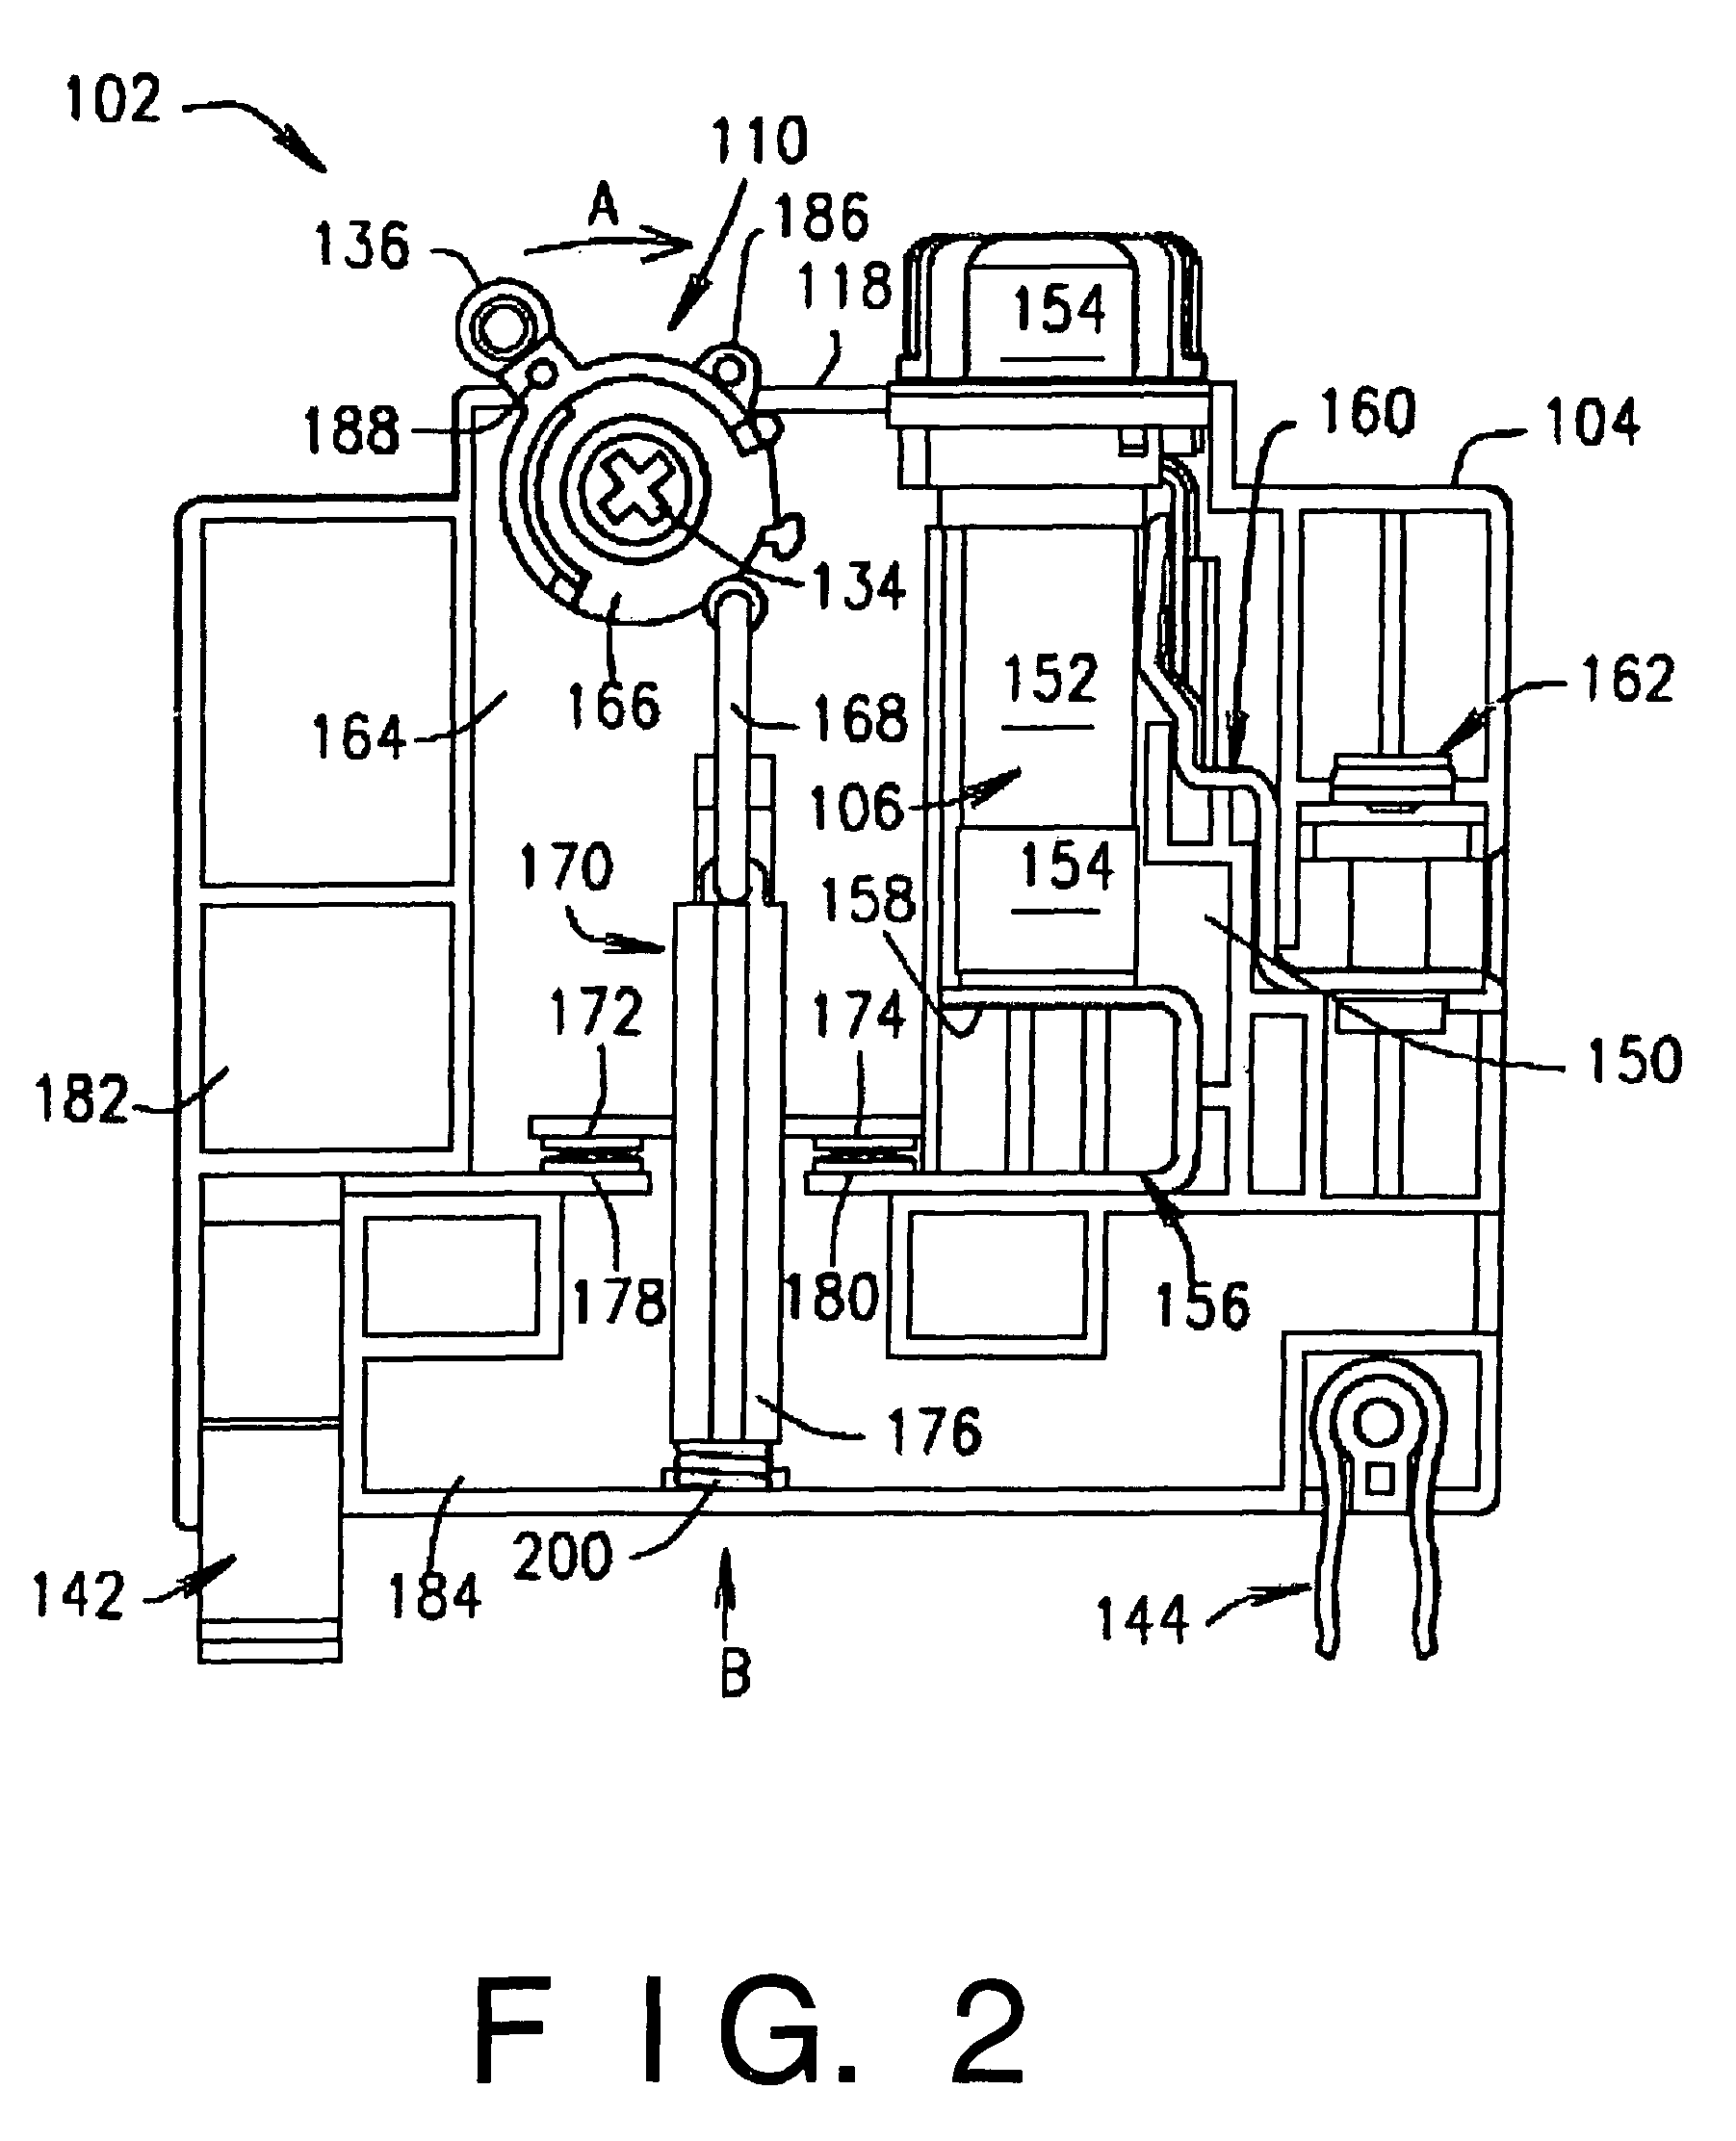 Panelboard for fusible switching disconnect devices